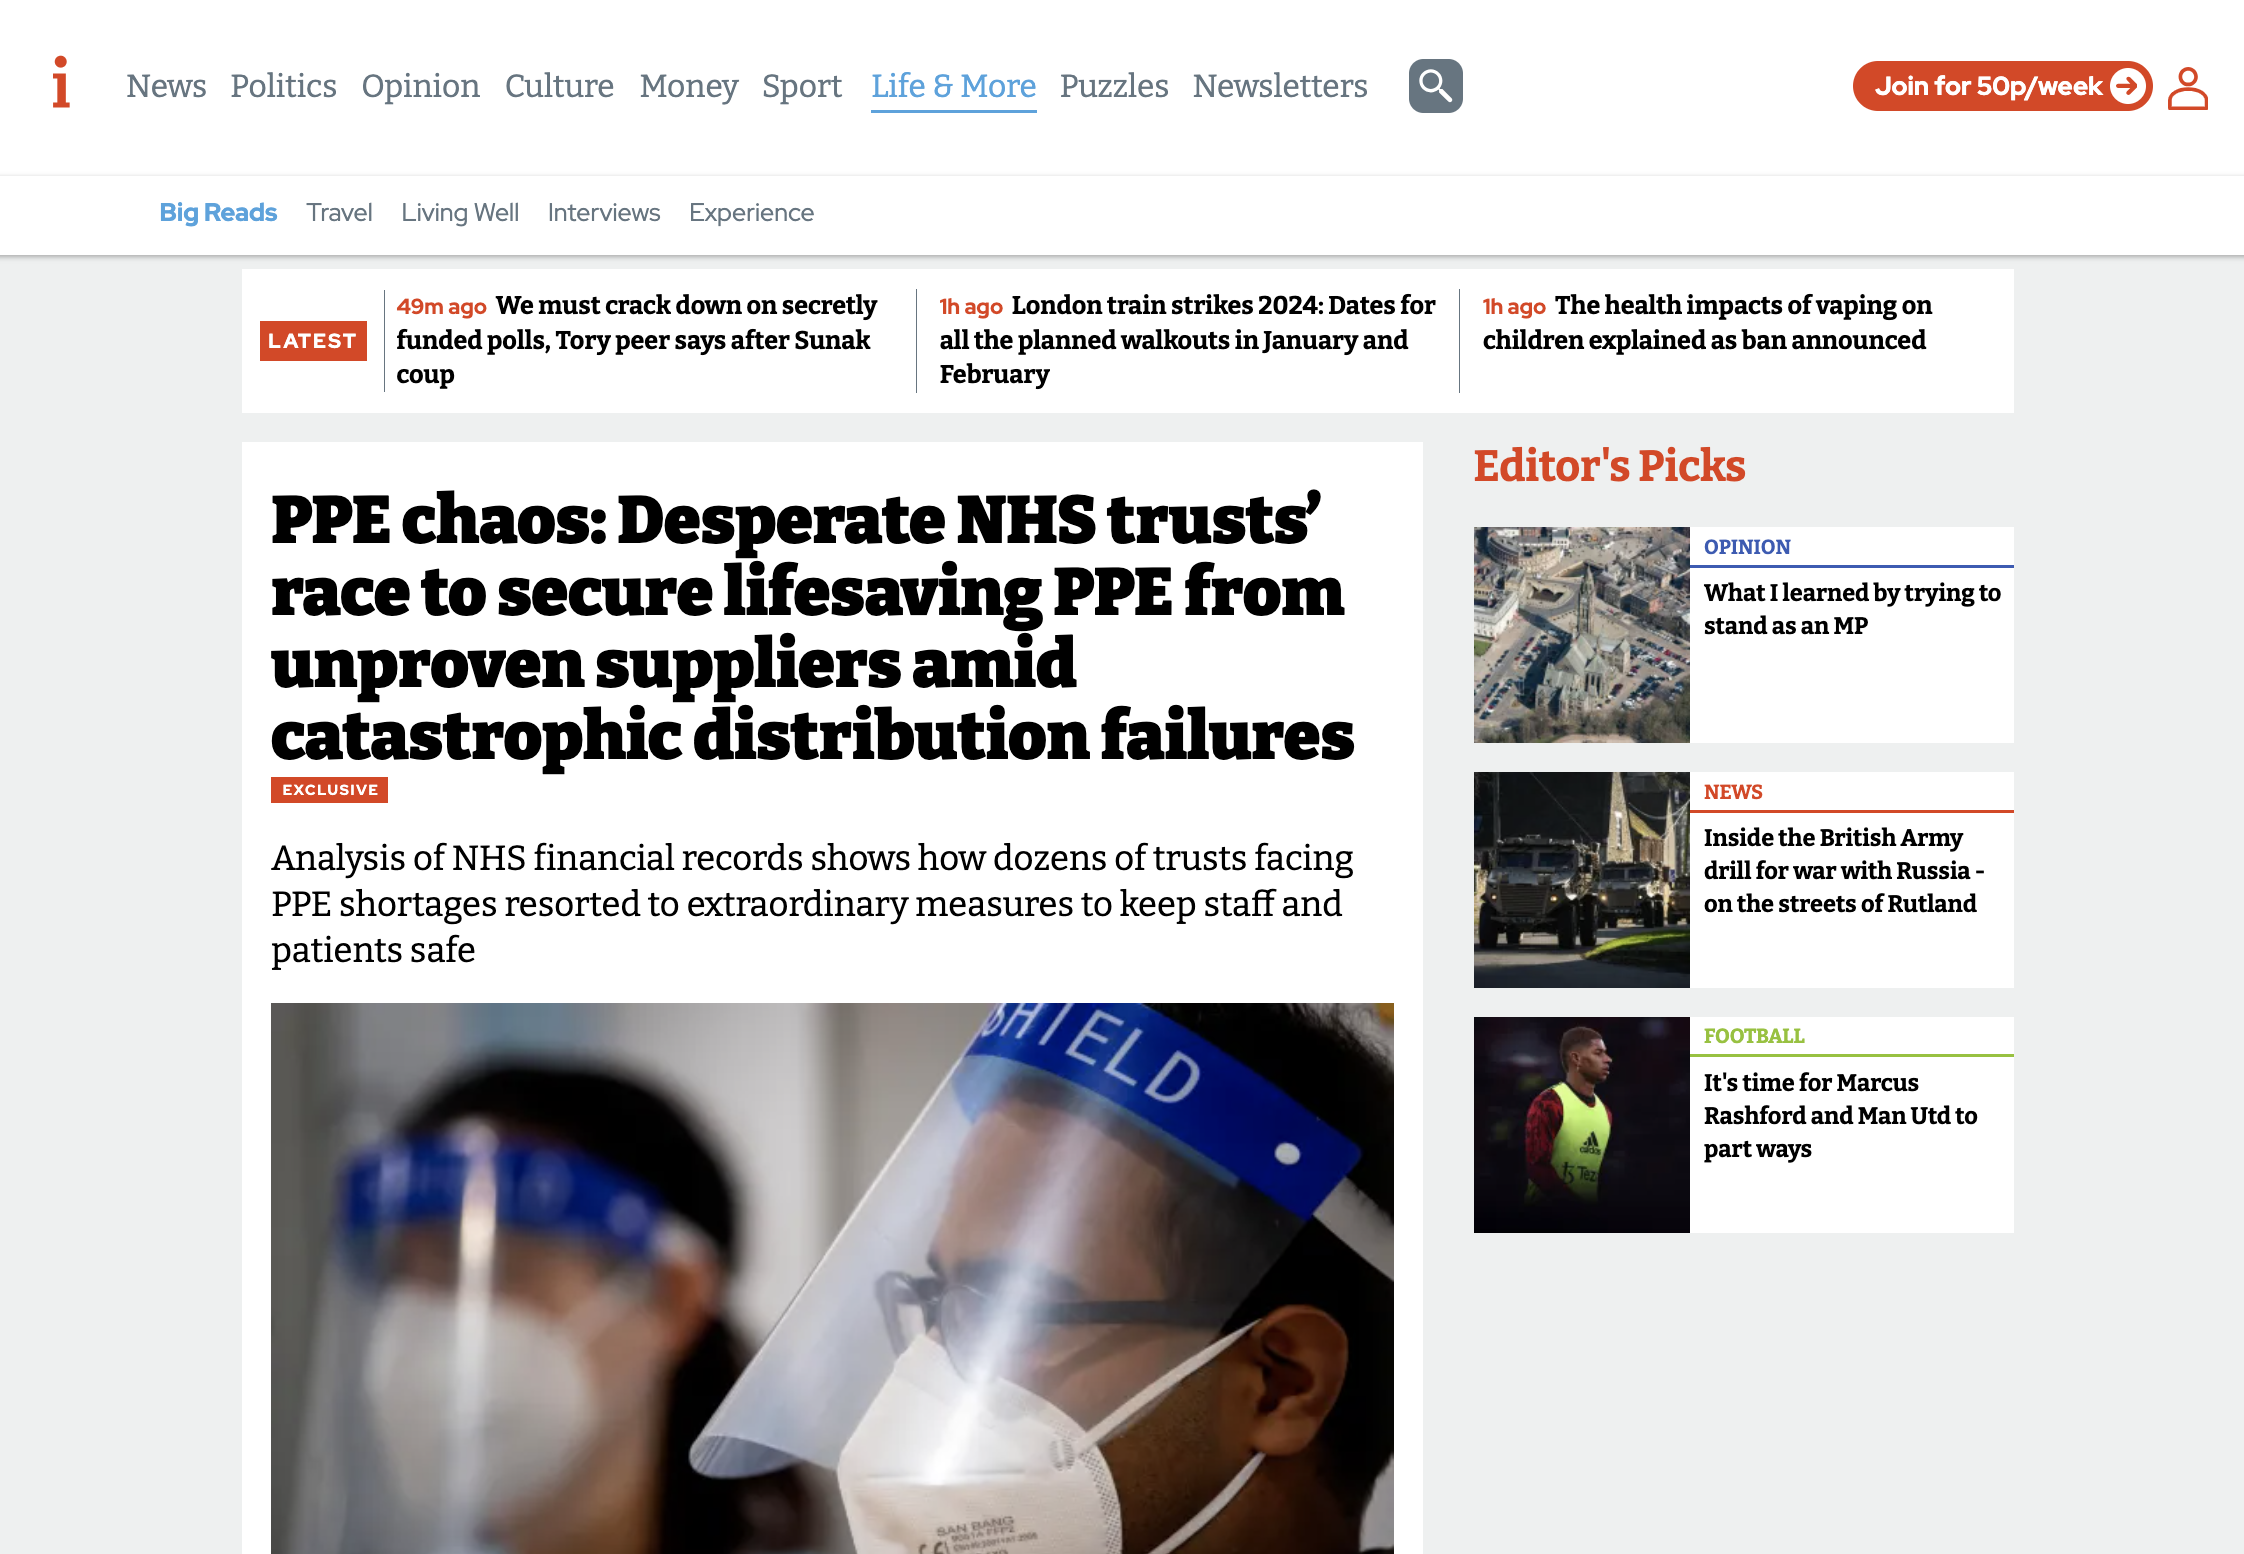 A screenshot of Dean's award-winning story in the i. The headline reads: PPE chaos: Desperate NHS trusts’ race to secure lifesaving PPE from unproven suppliers amid catastrophic distribution failure